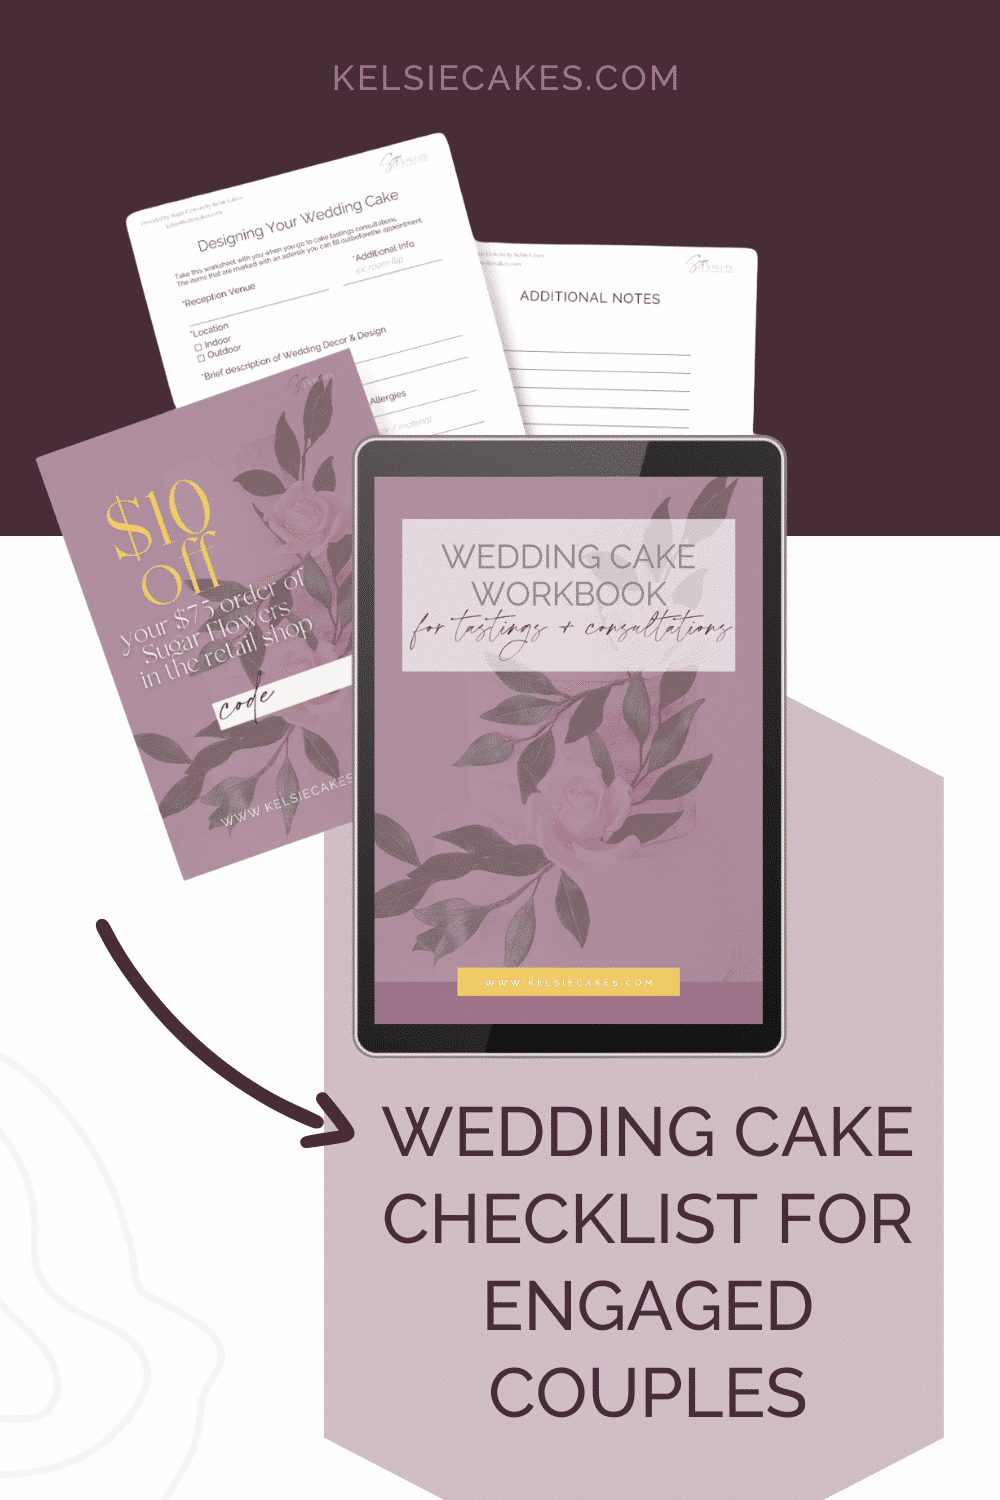 Image shows different pages of Kelsie Cakes' wedding cake checklist for engaged couples.